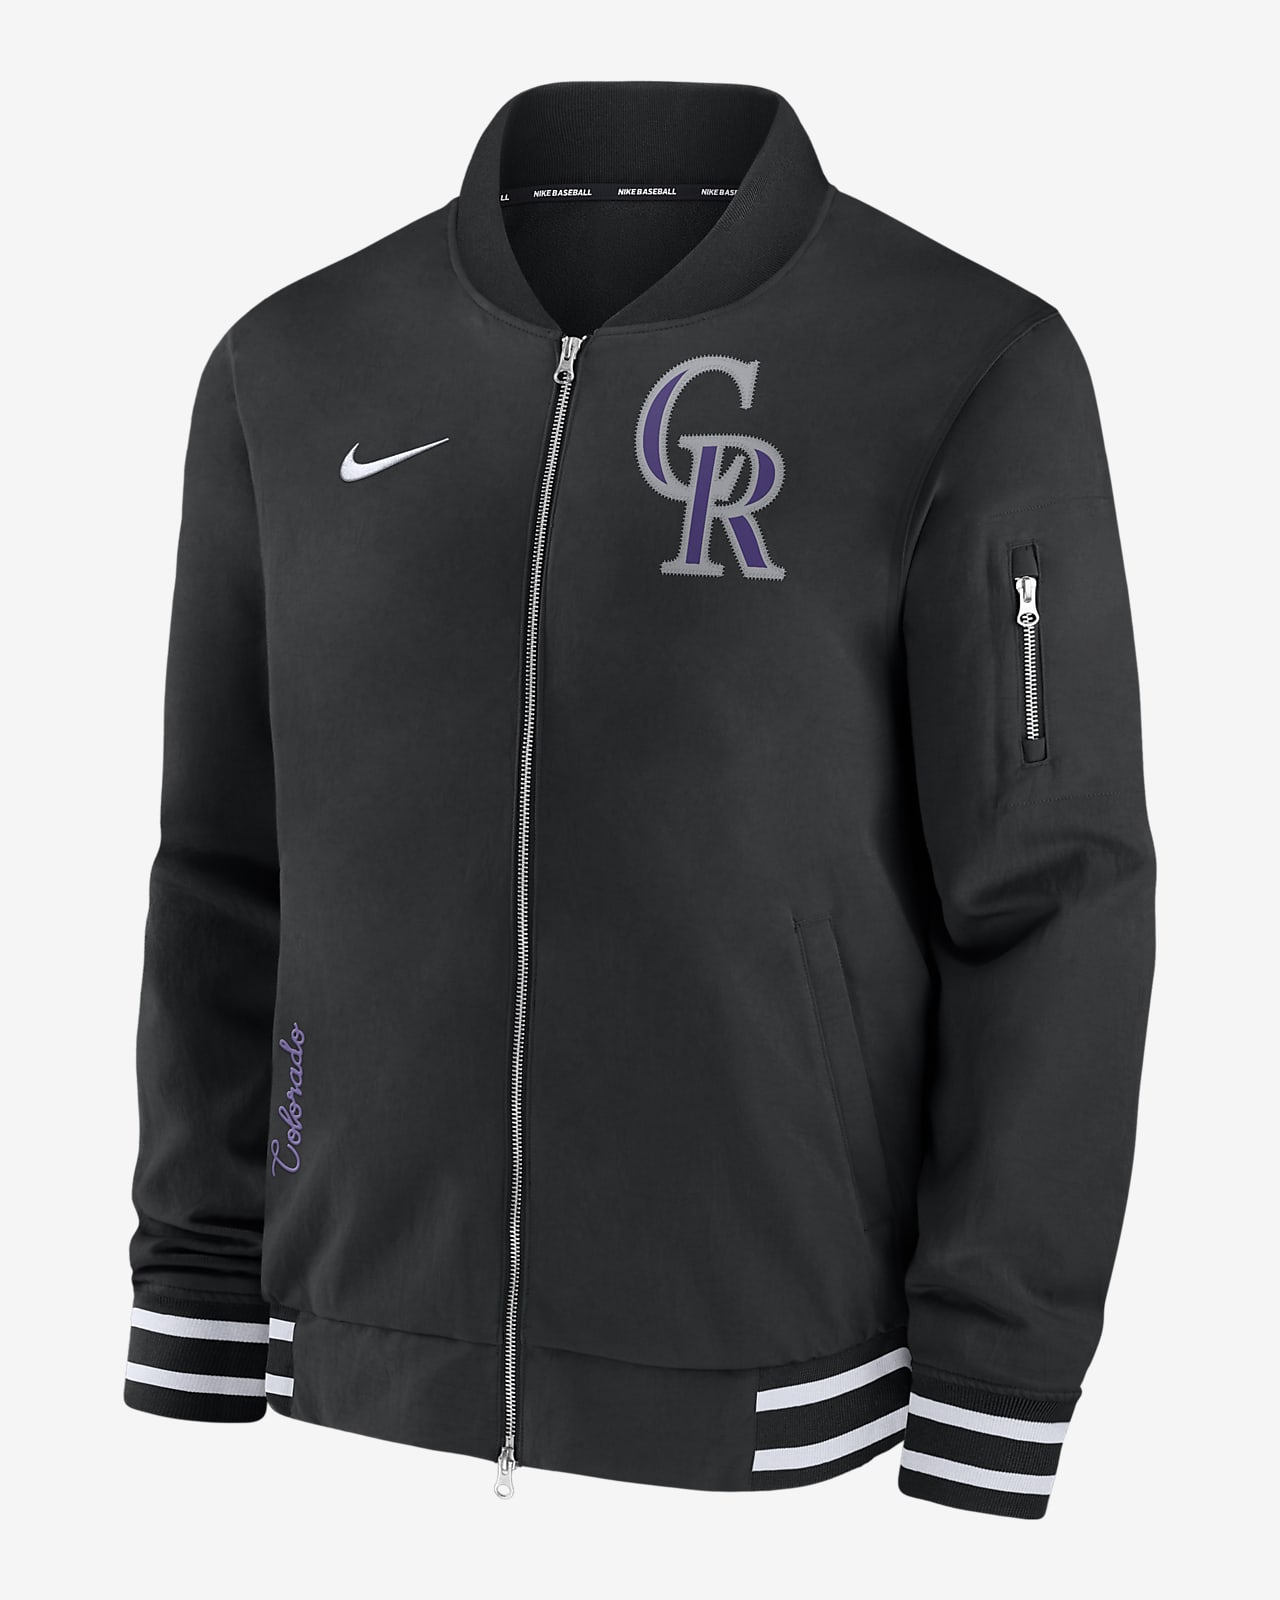 Colorado Rockies Authentic Collection Men's Nike MLB Full-Zip Bomber Jacket